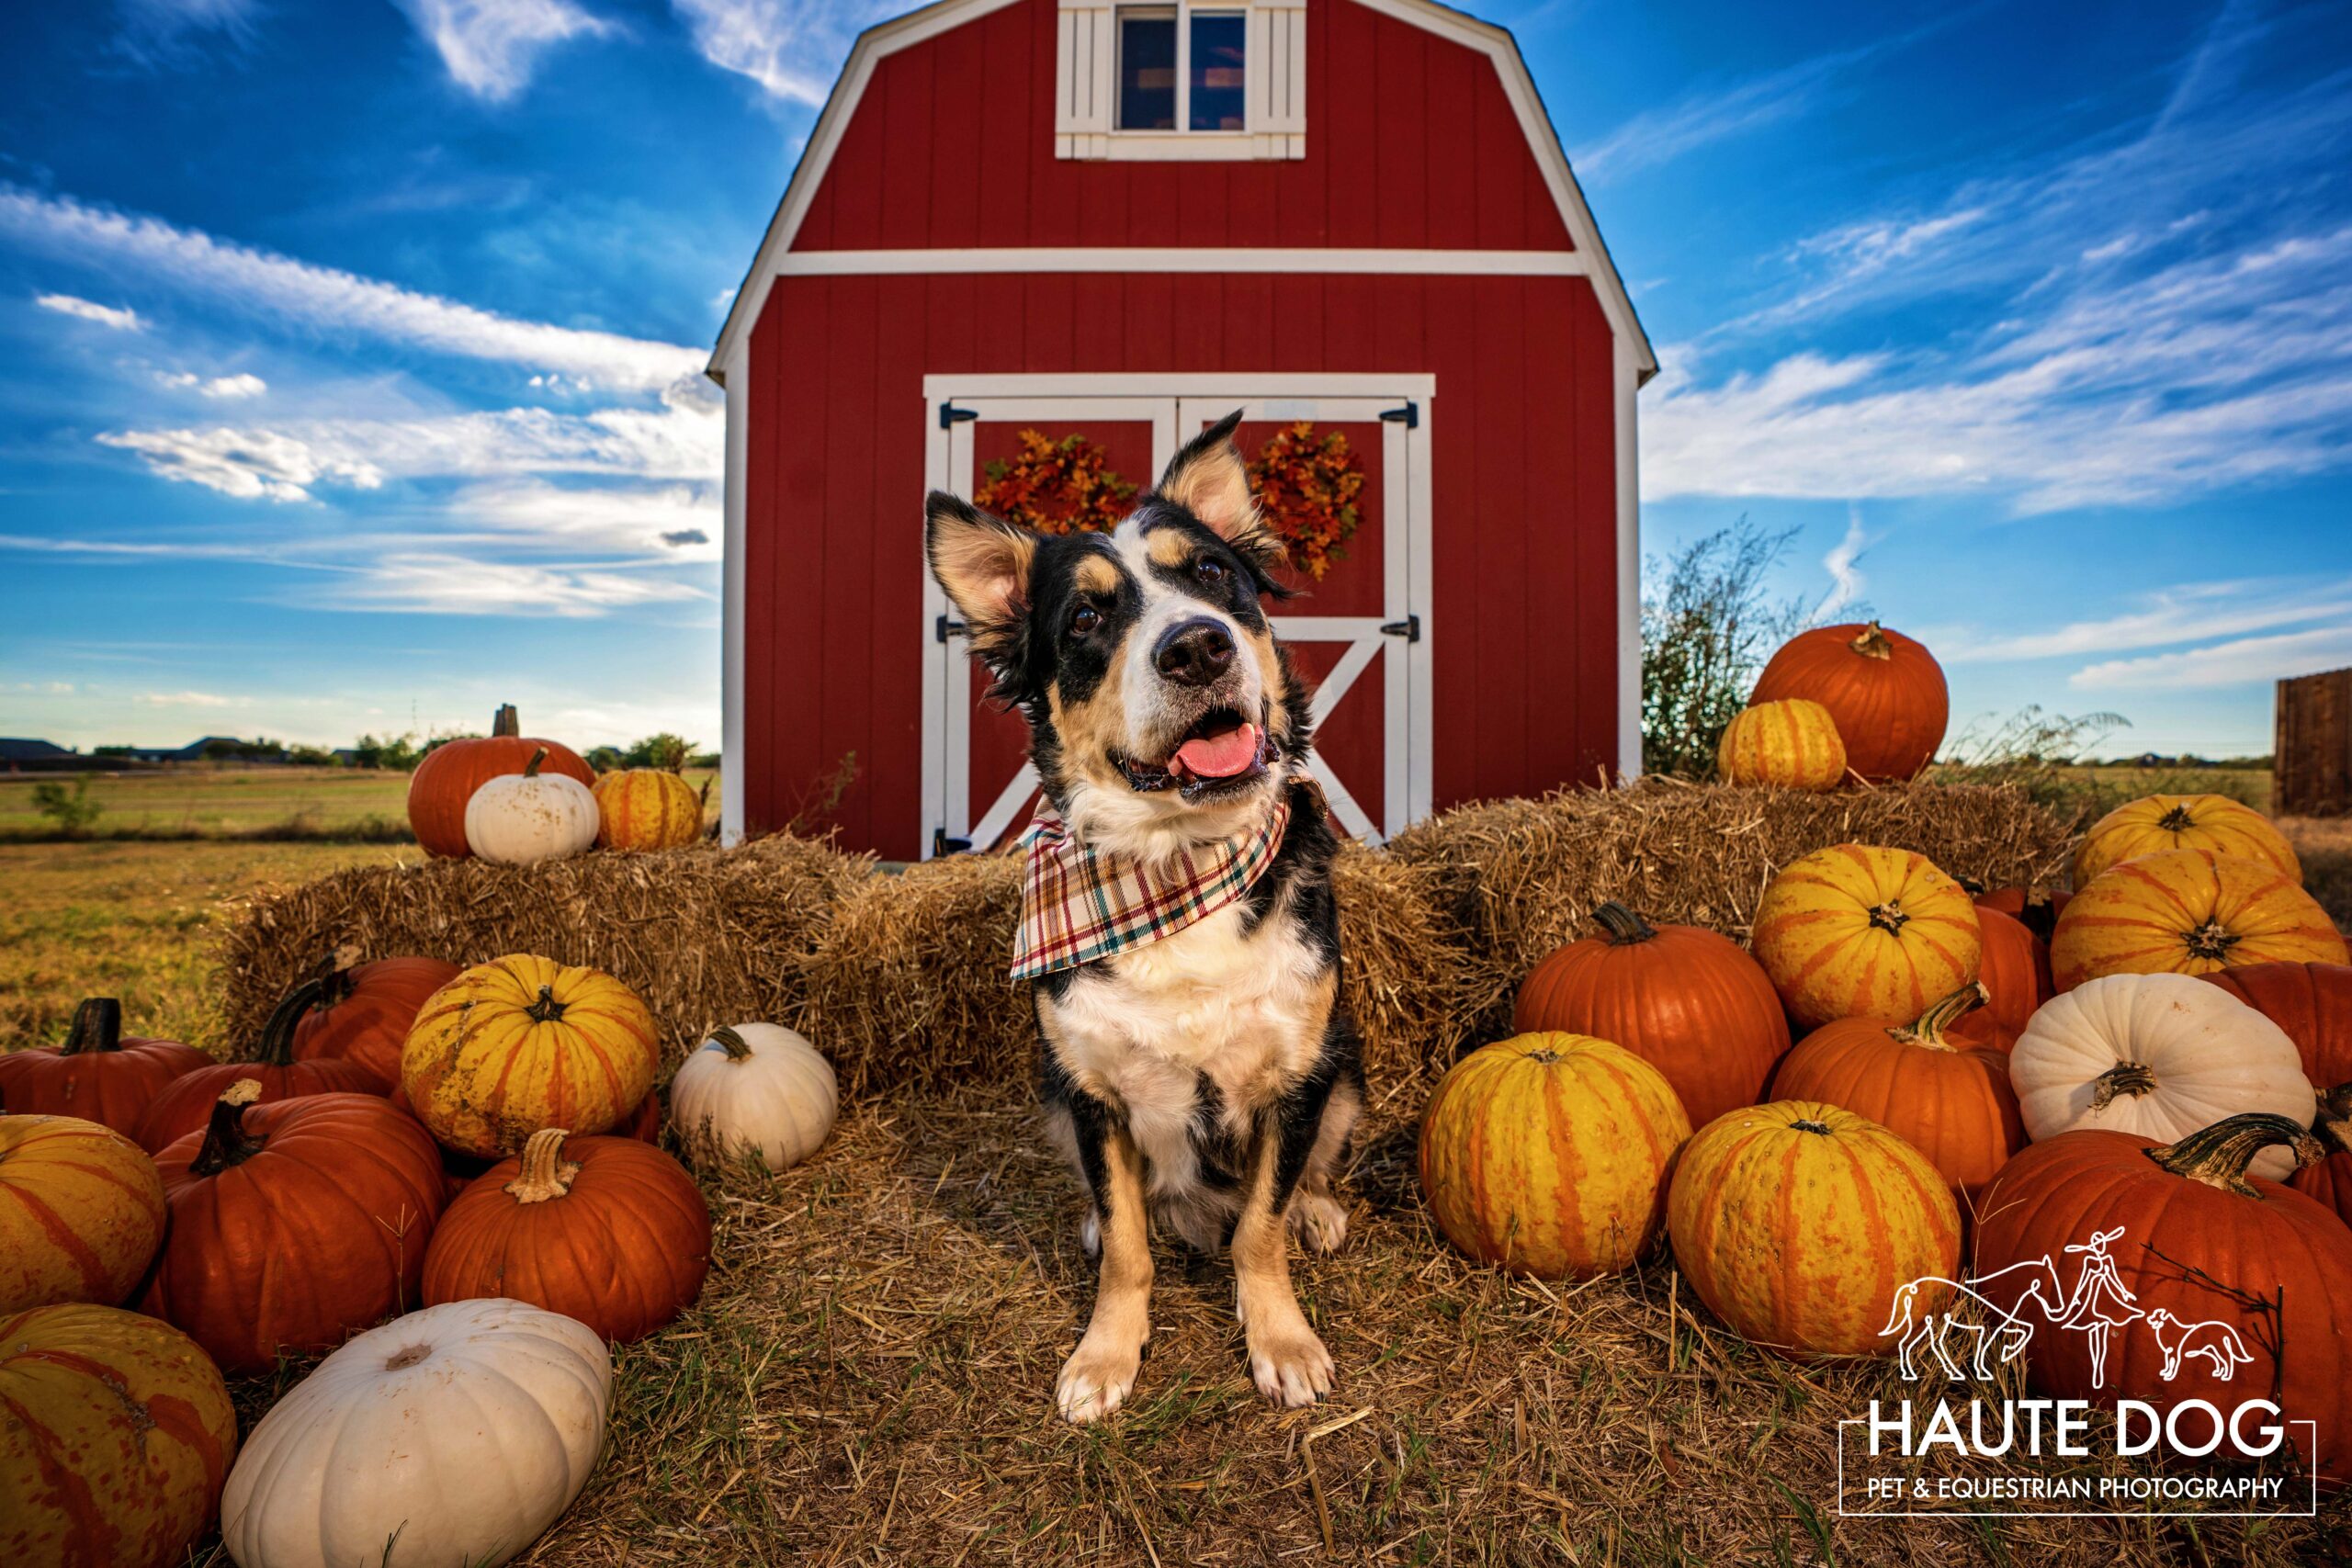 A tricolored dog sits in front of a red barn surrounded by pumpkins.